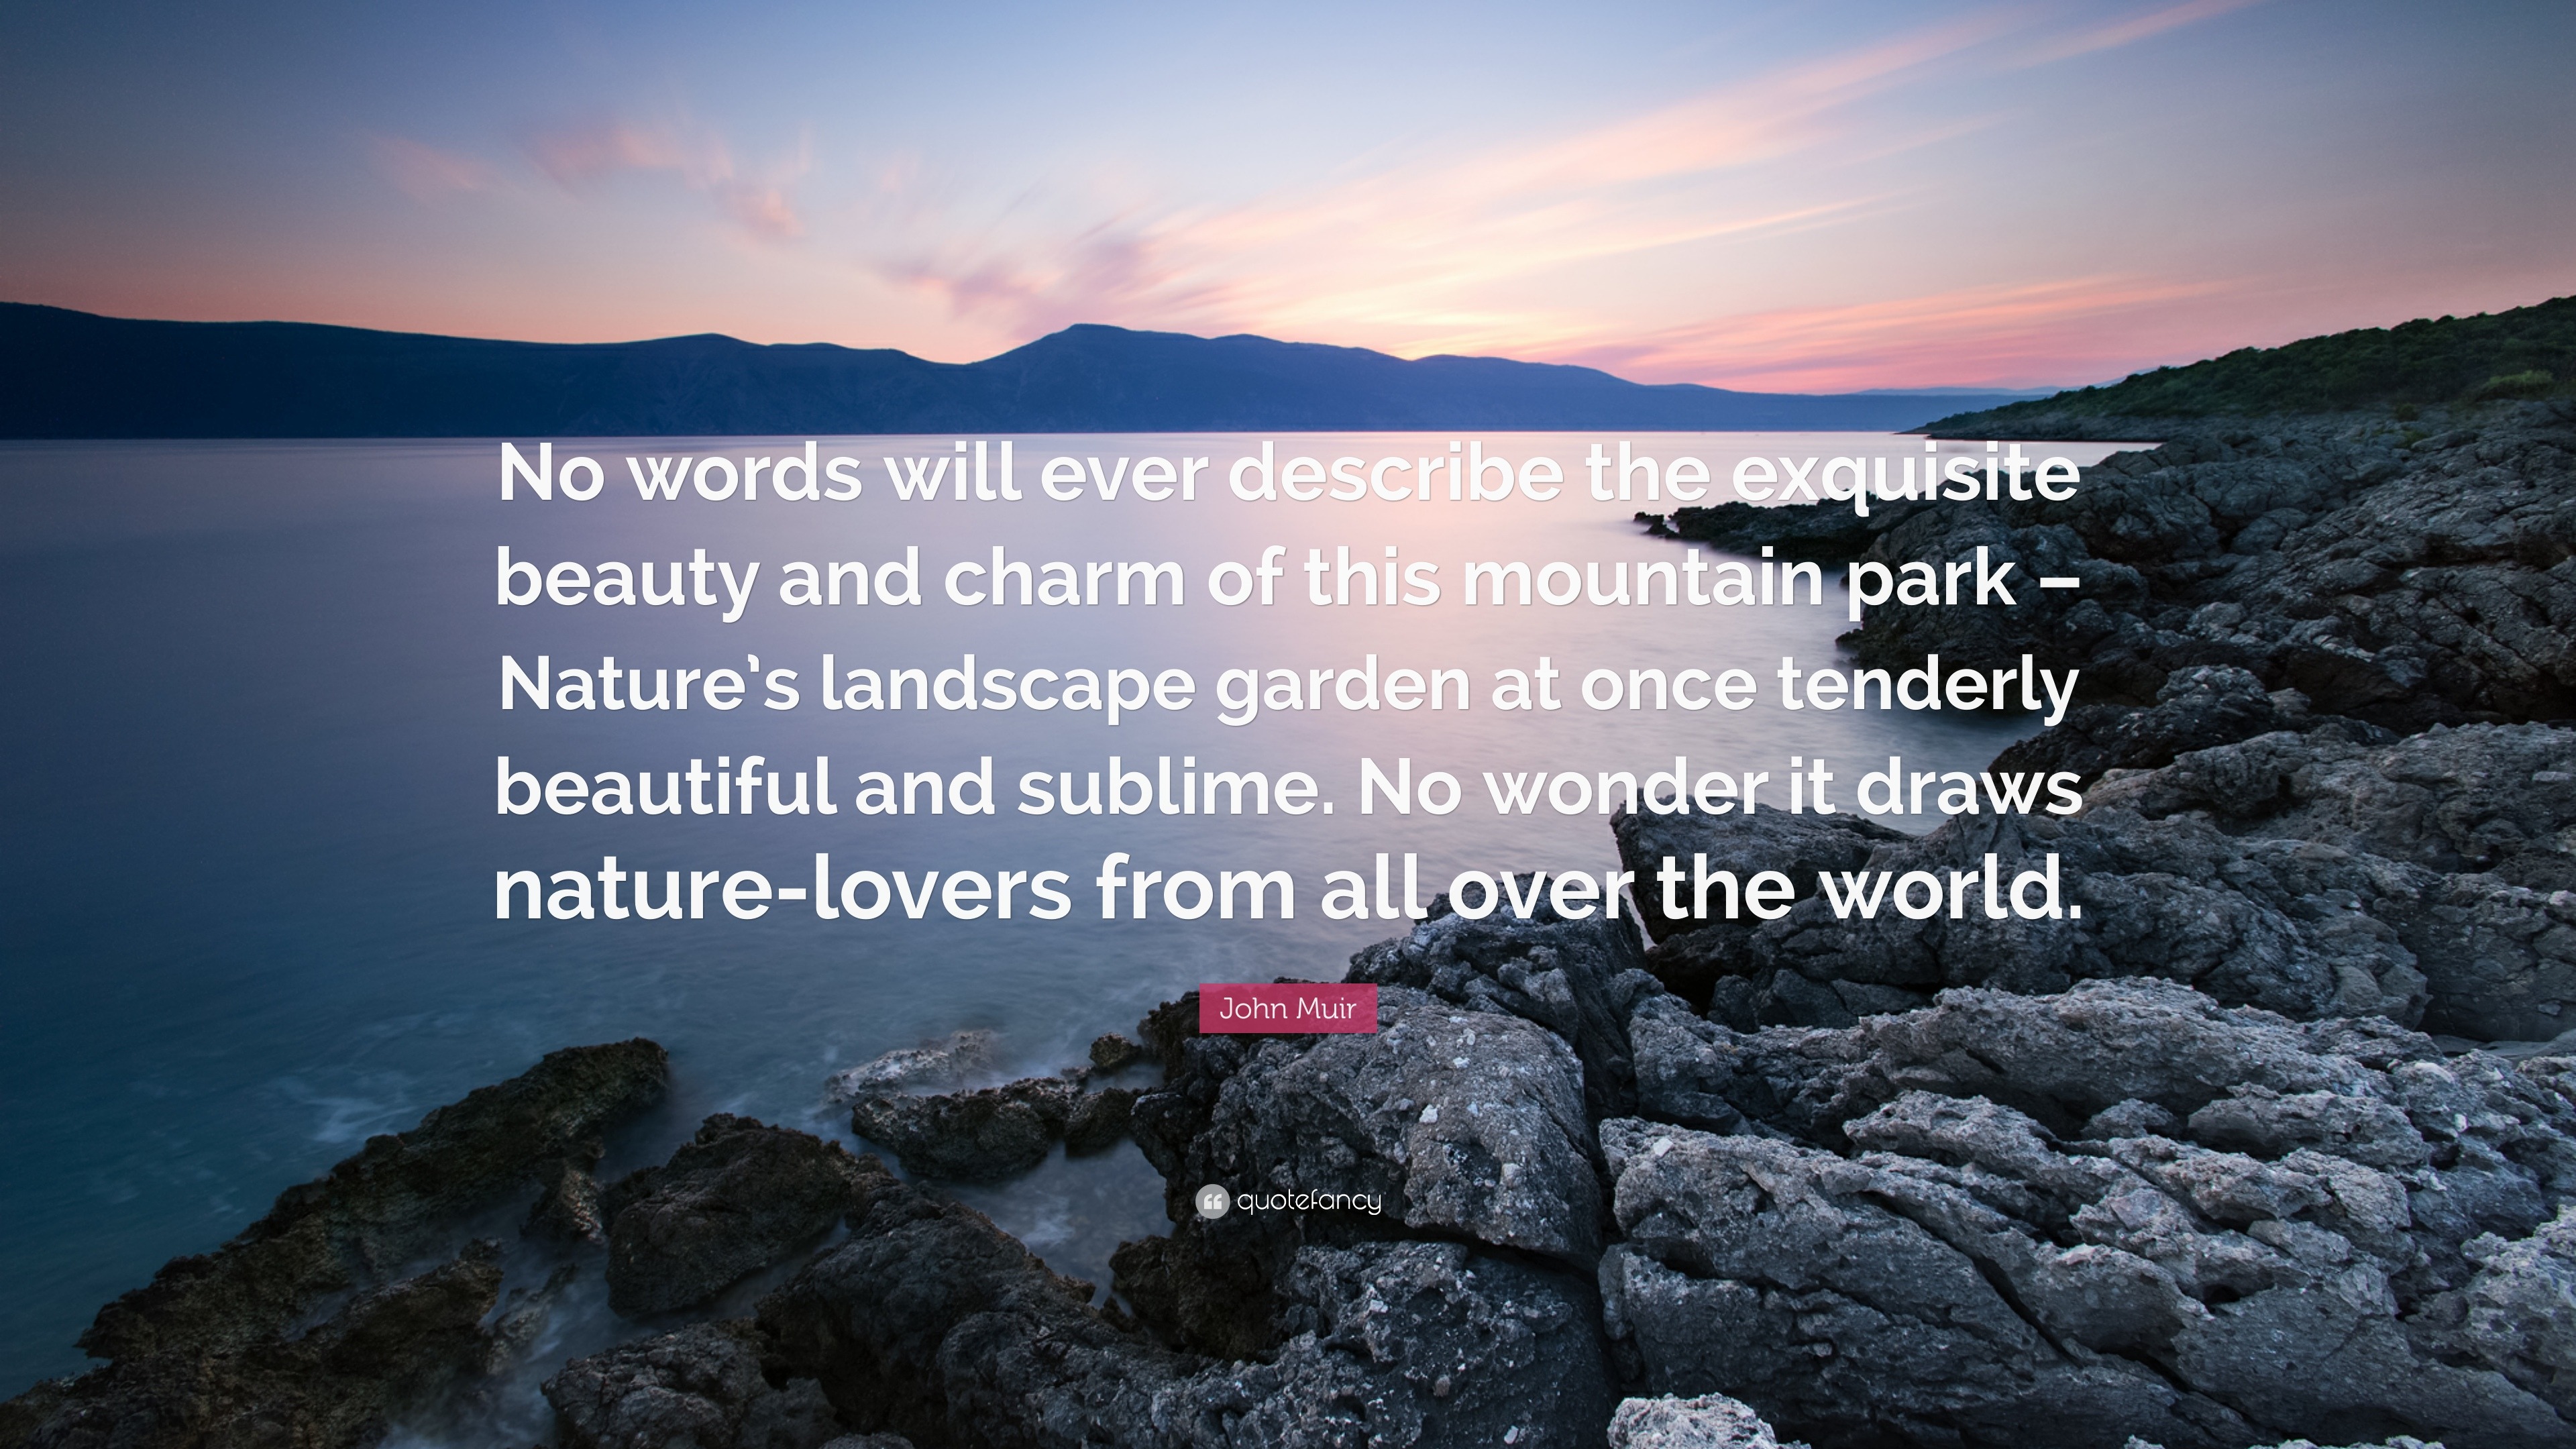 John Muir Quote: “No words will ever describe the exquisite beauty and